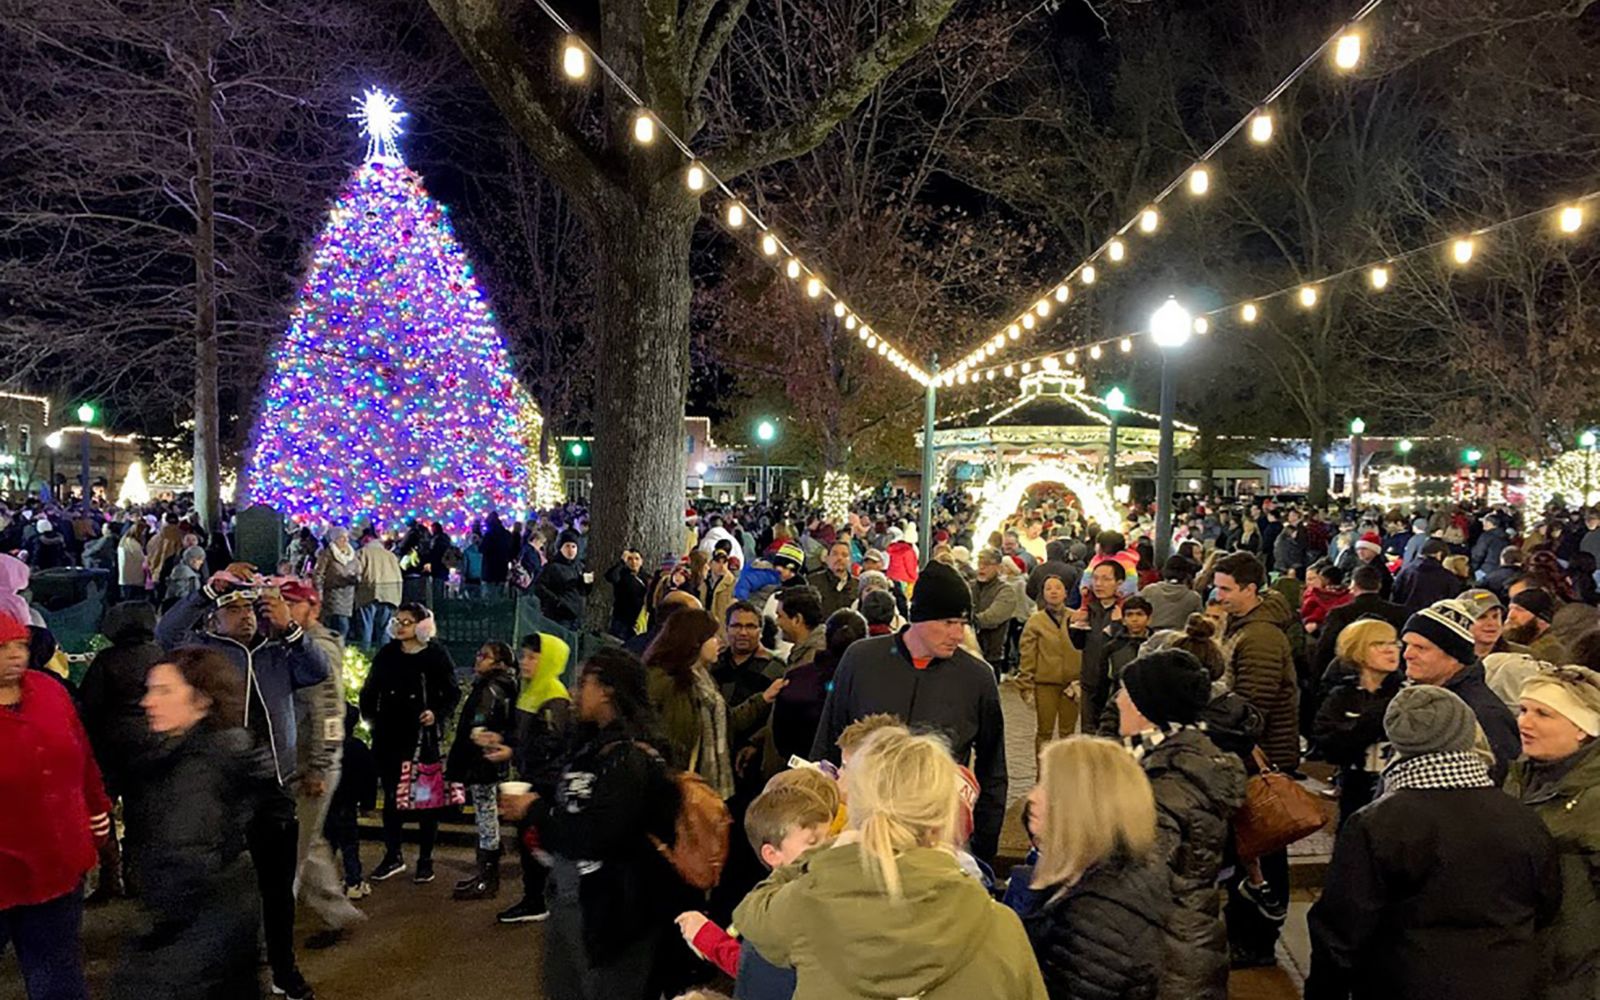 A crowd of people in a town square around a lit Christmas tree at night.